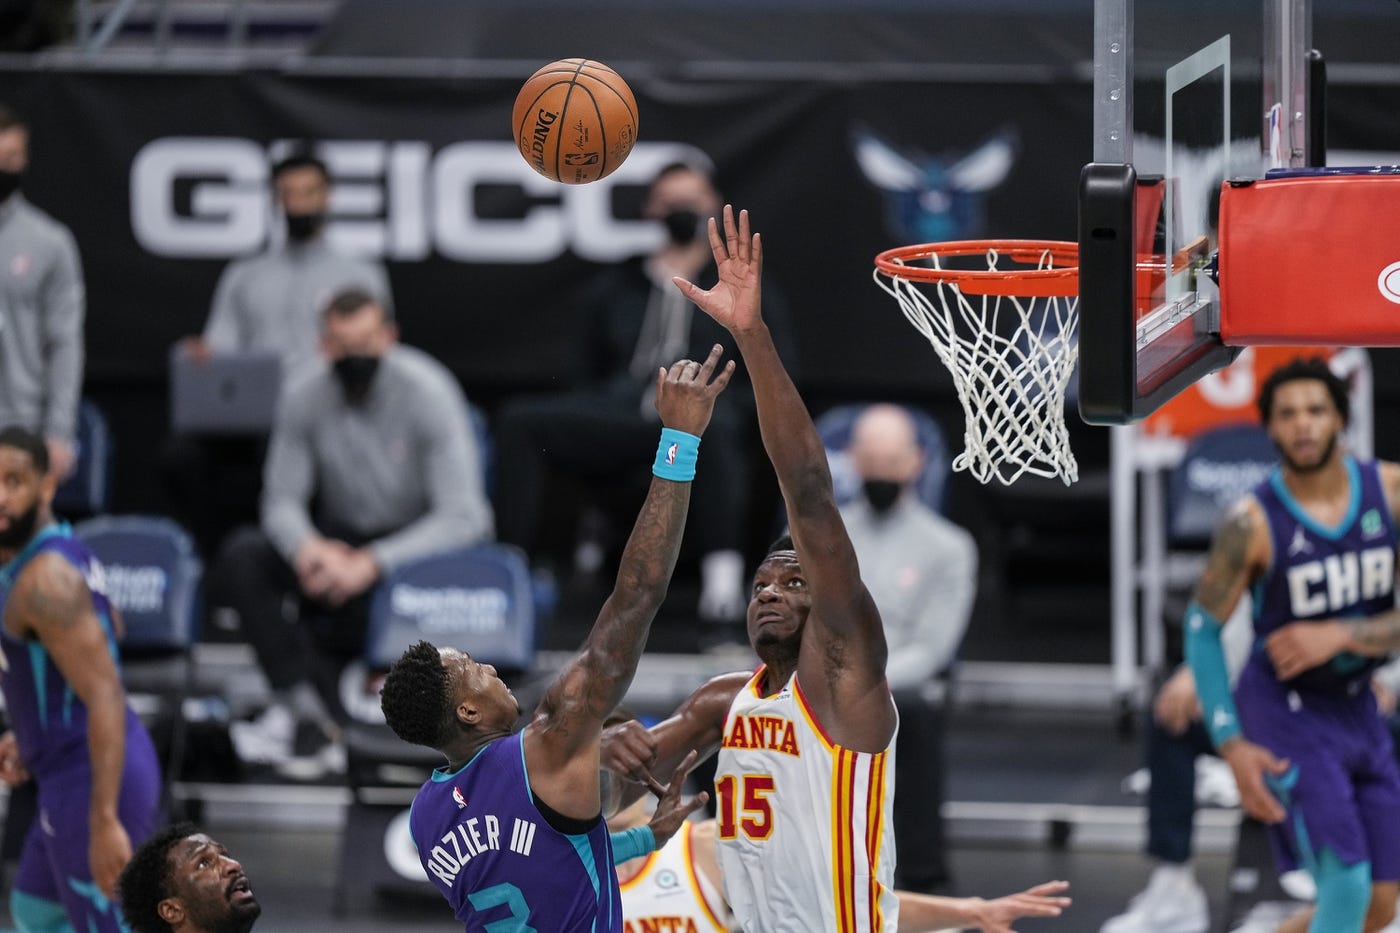 Apr 11, 2021; Charlotte, North Carolina, USA; Atlanta Hawks center Clint Capela (15) tries to block a shot by Charlotte Hornets guard Terry Rozier (3) during the second half at Spectrum Center. Mandatory Credit: Jim Dedmon-USA TODAY Sports